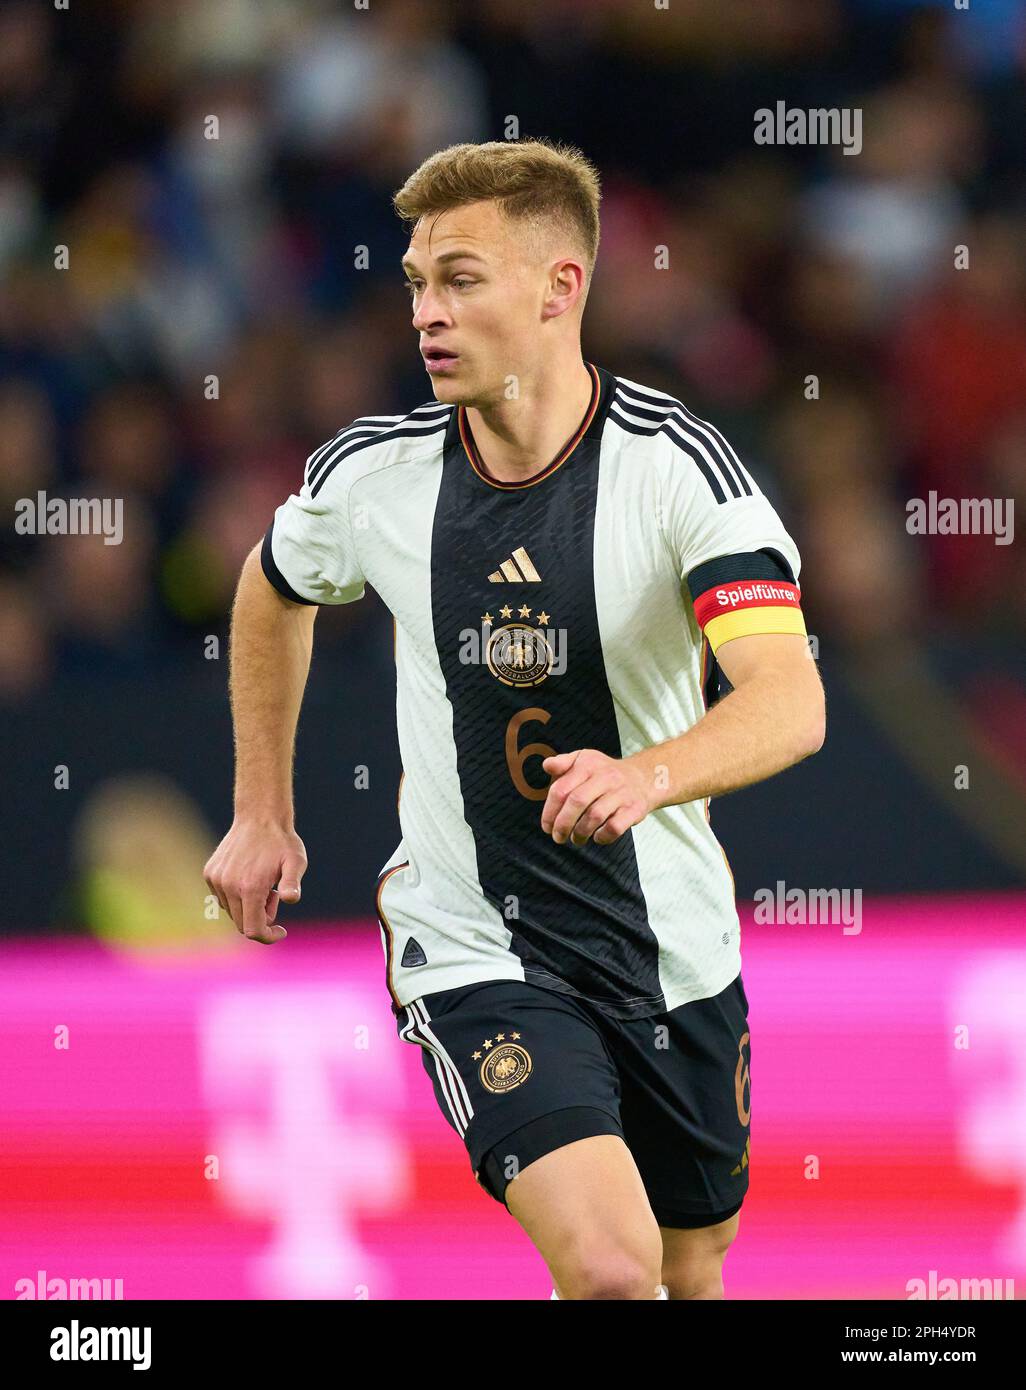 Joshua Kimmich, DFB 6  in the friendly match GERMANY - PERU 2-0 Preparation for European Championships 2024 in Germany ,Season 2022/2023, on Mar 25, 2023  in Mainz, Germany.  © Peter Schatz / Alamy Live News Stock Photo